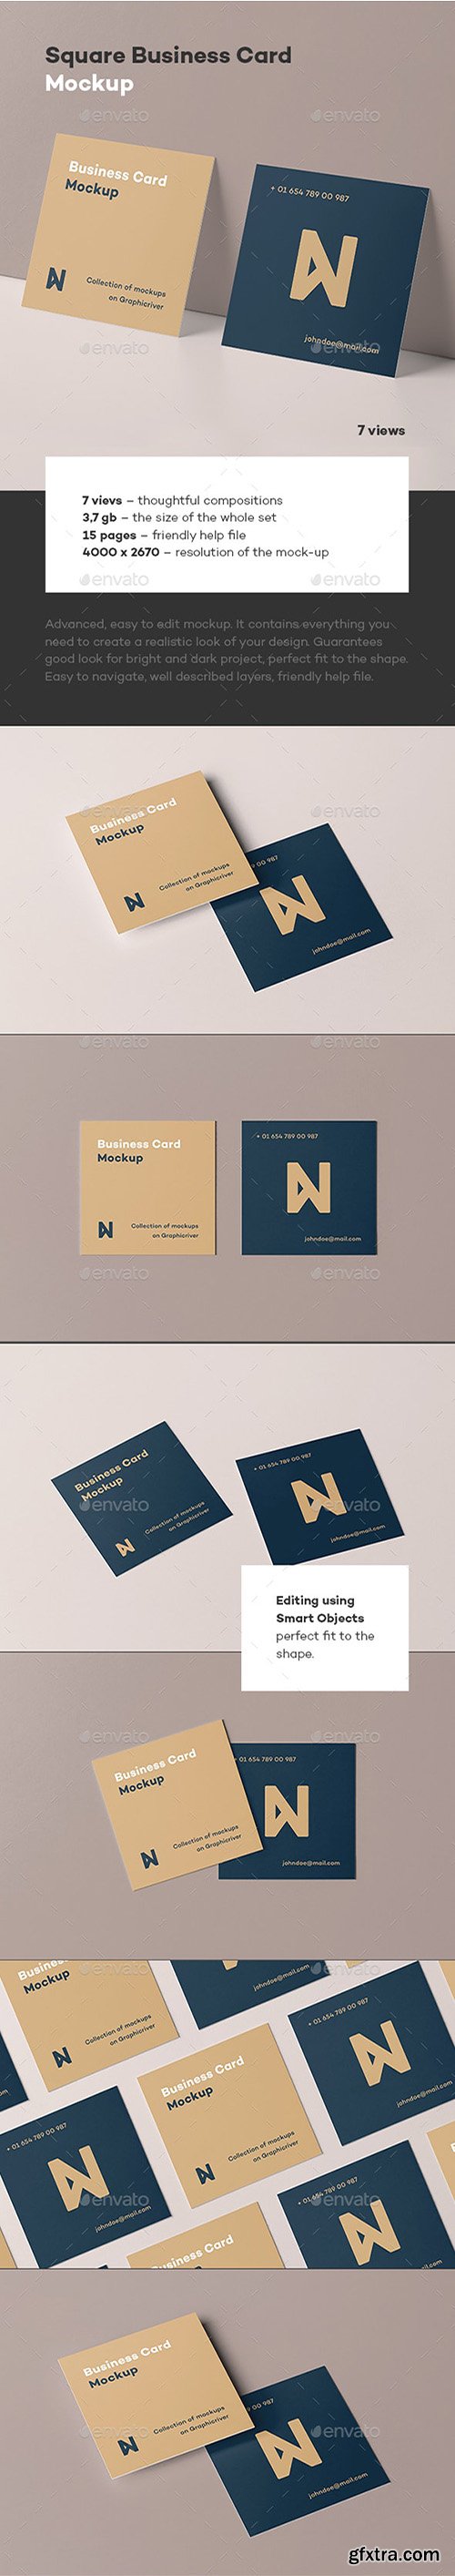 Square Business Card Mock-up 23484478